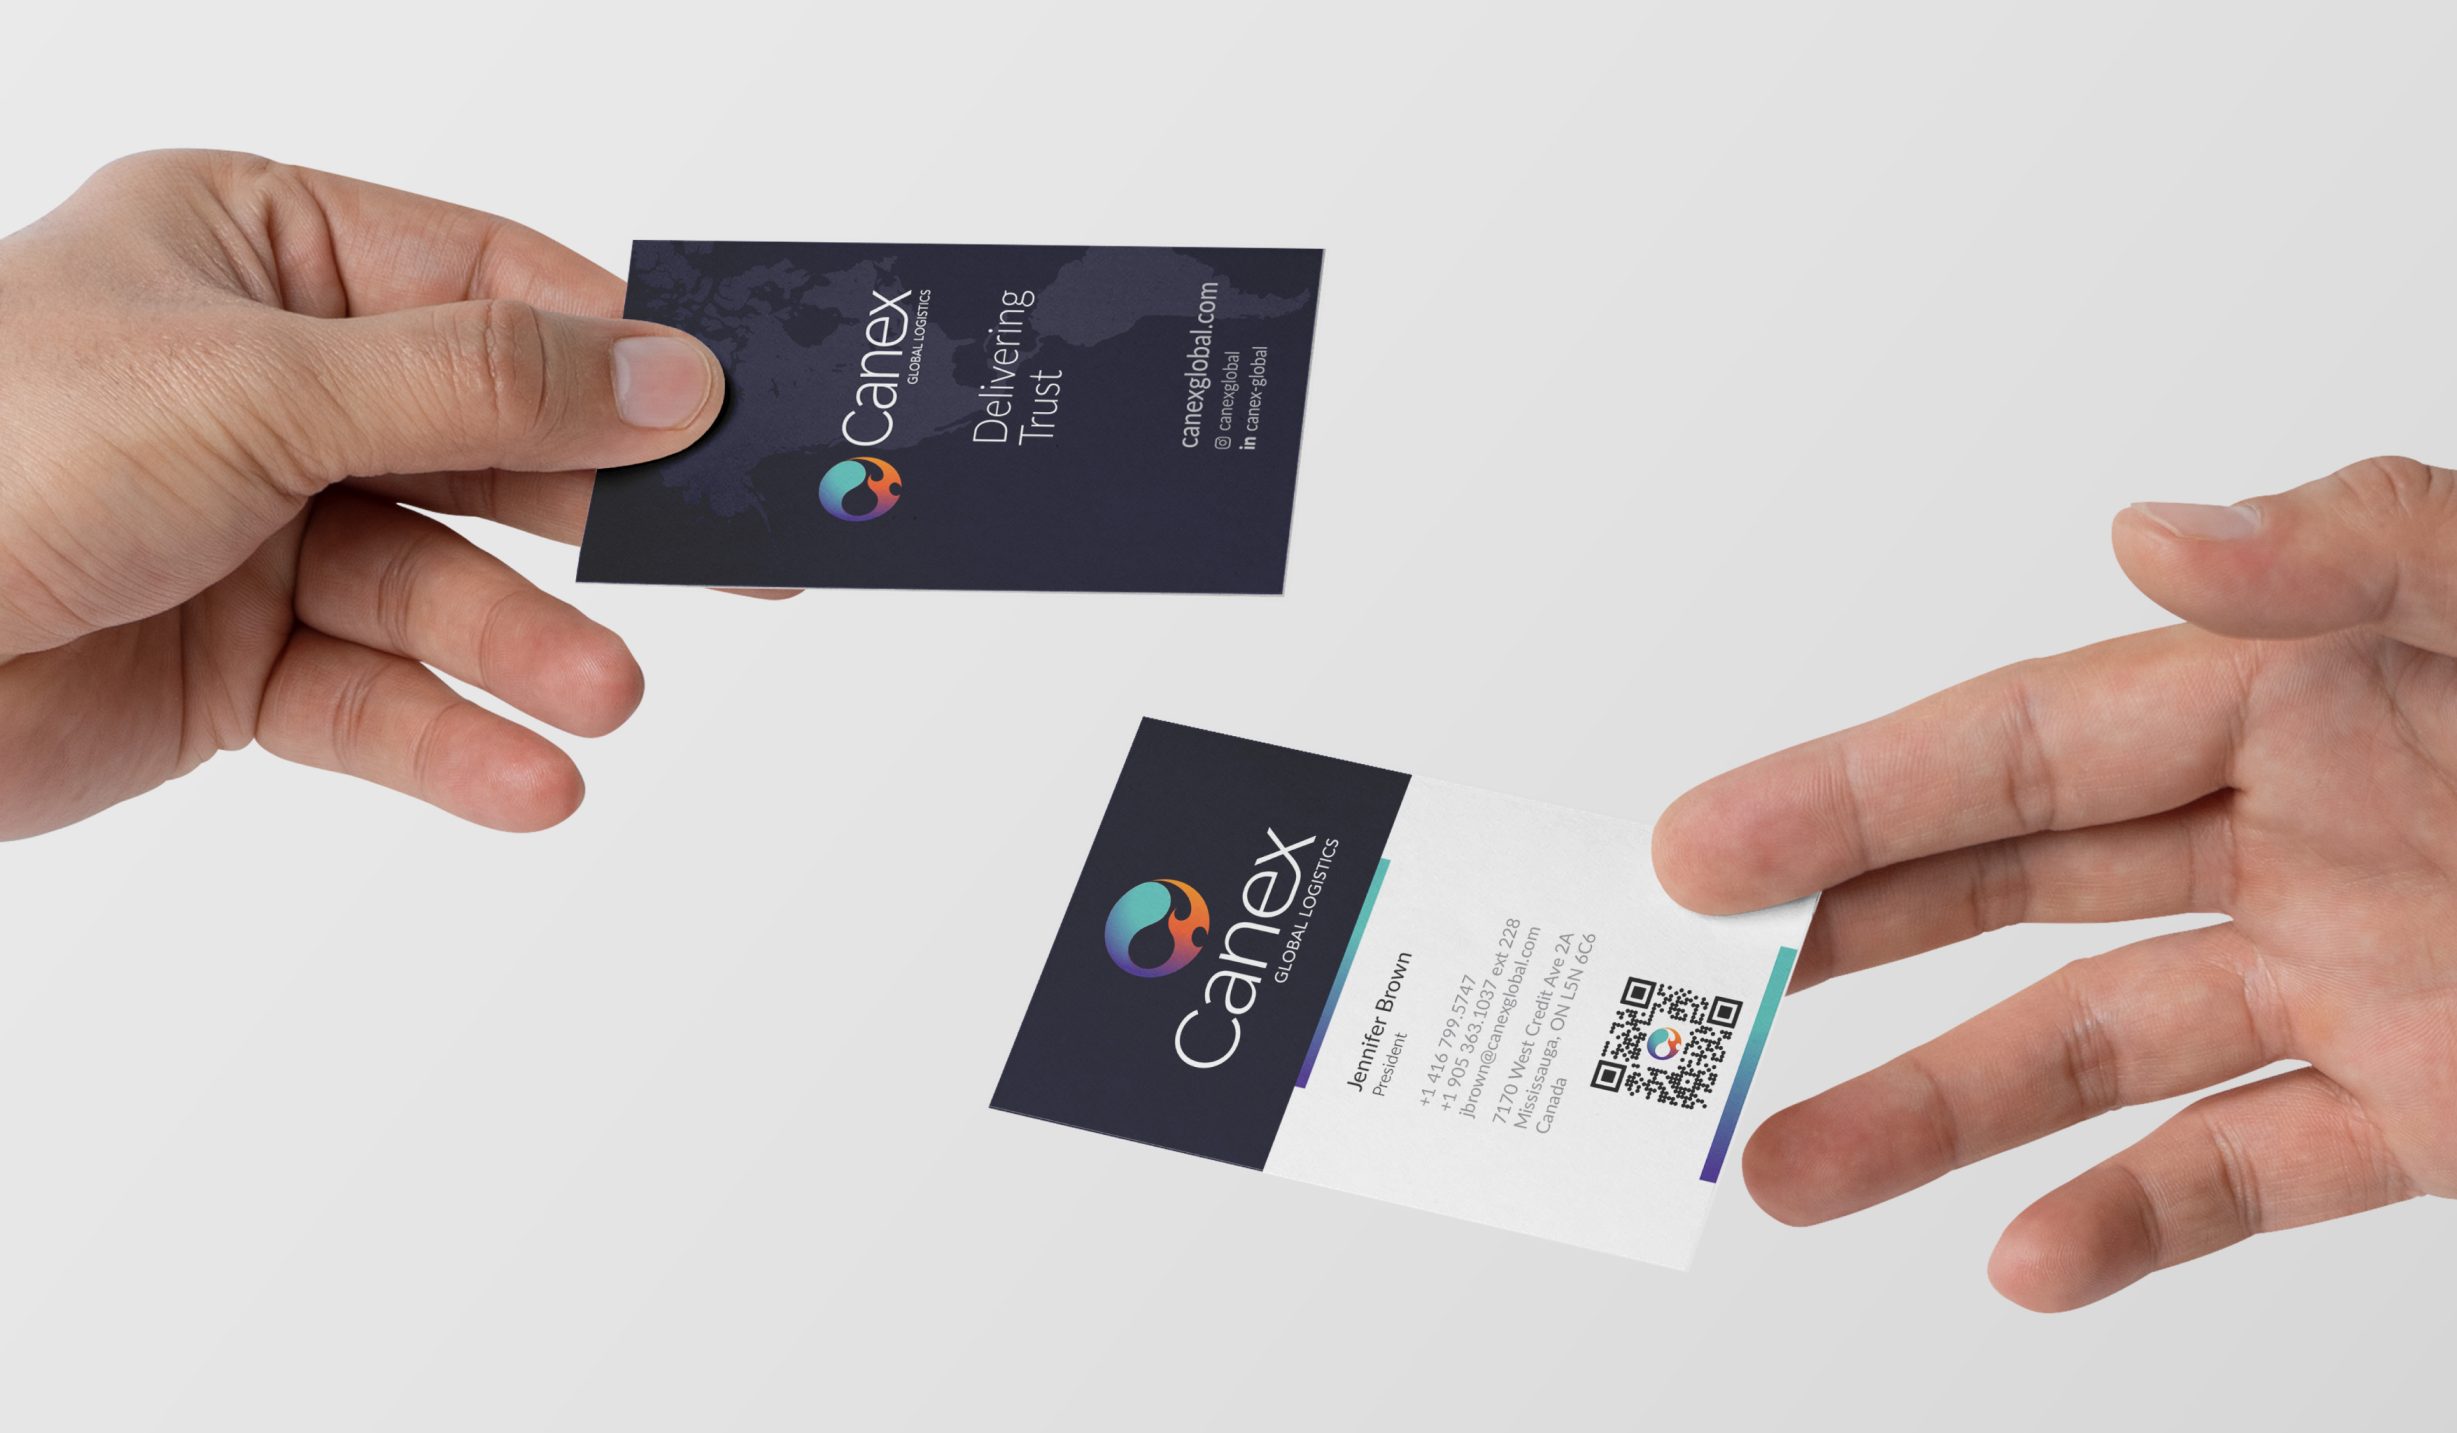 Canex Global Logistics New Business Cards Front and Back in Hand